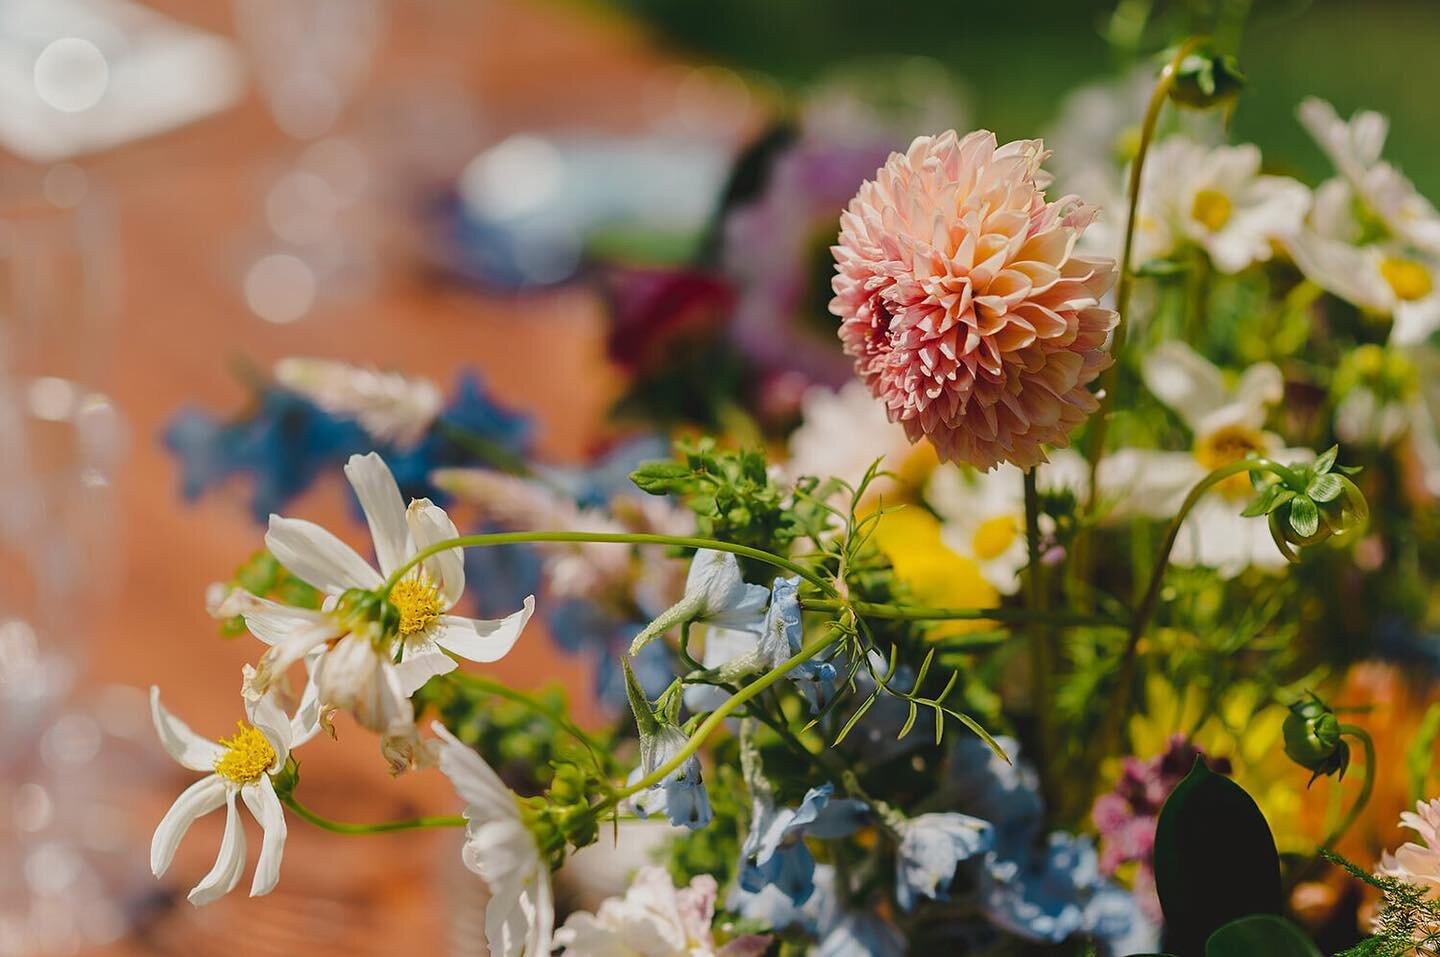 When couples choose seasonal and local flowers to adorn their weddings they are inviting nature to celebrate them year after year. Waking down the side walk to see a dahlia or cosmos blooming in late summer, or a  peony in spring makes that &ldquo;I 